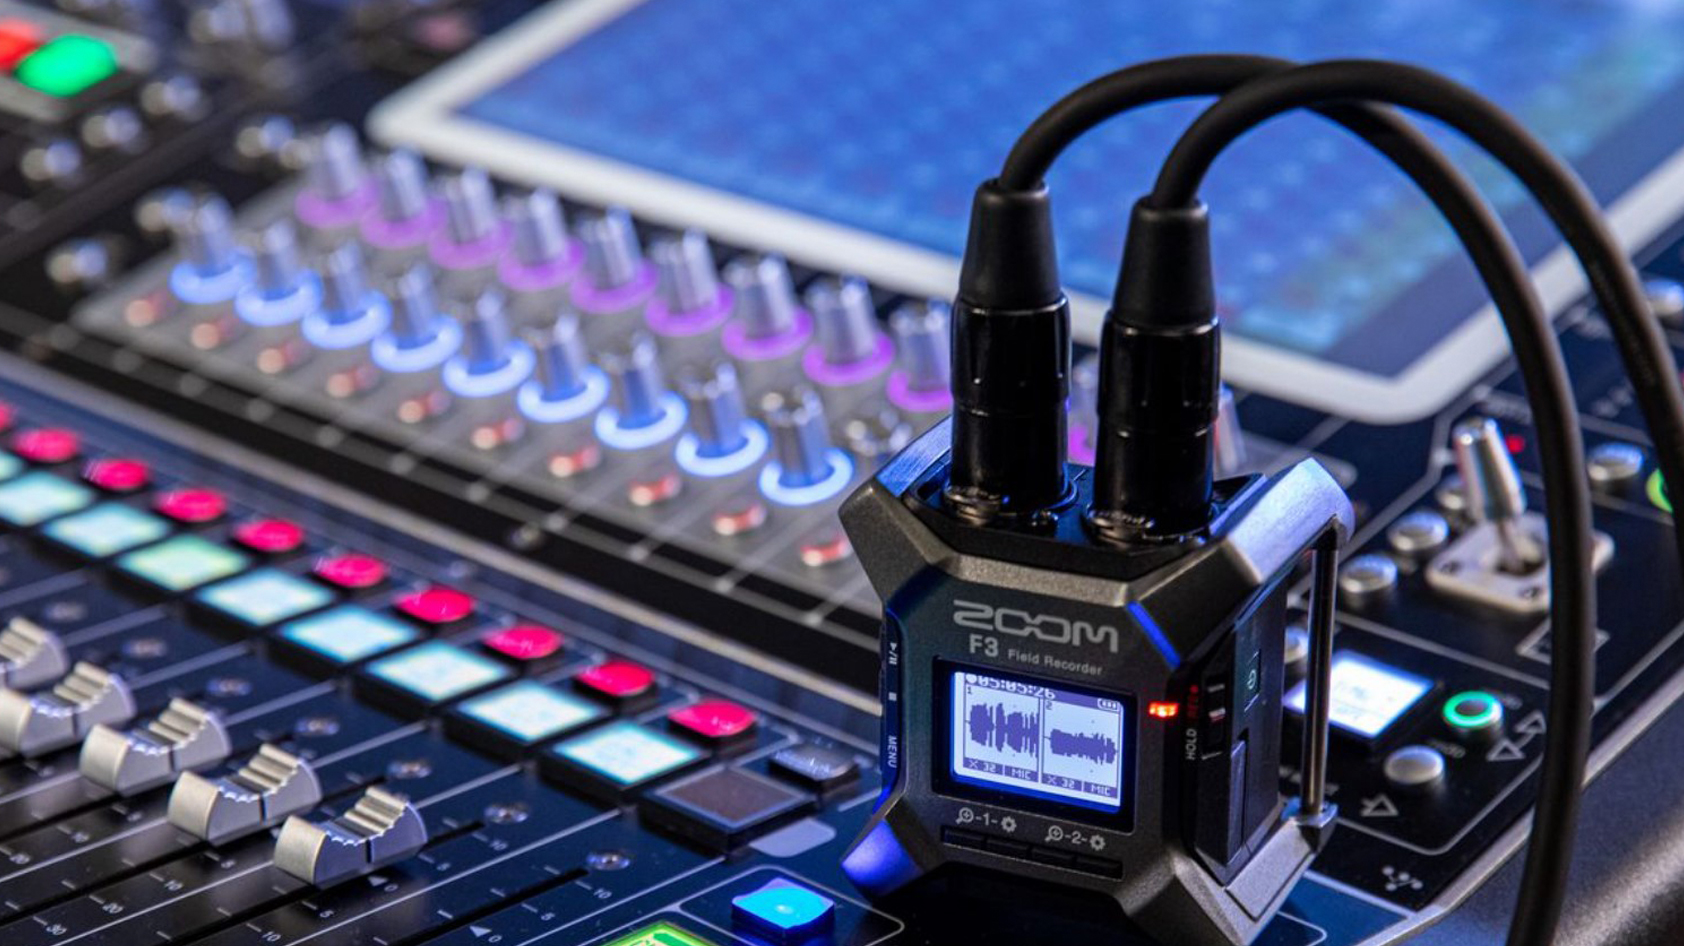 The Zoom F3 Field Recorder sits on a mixing board with two XLR cables connected.